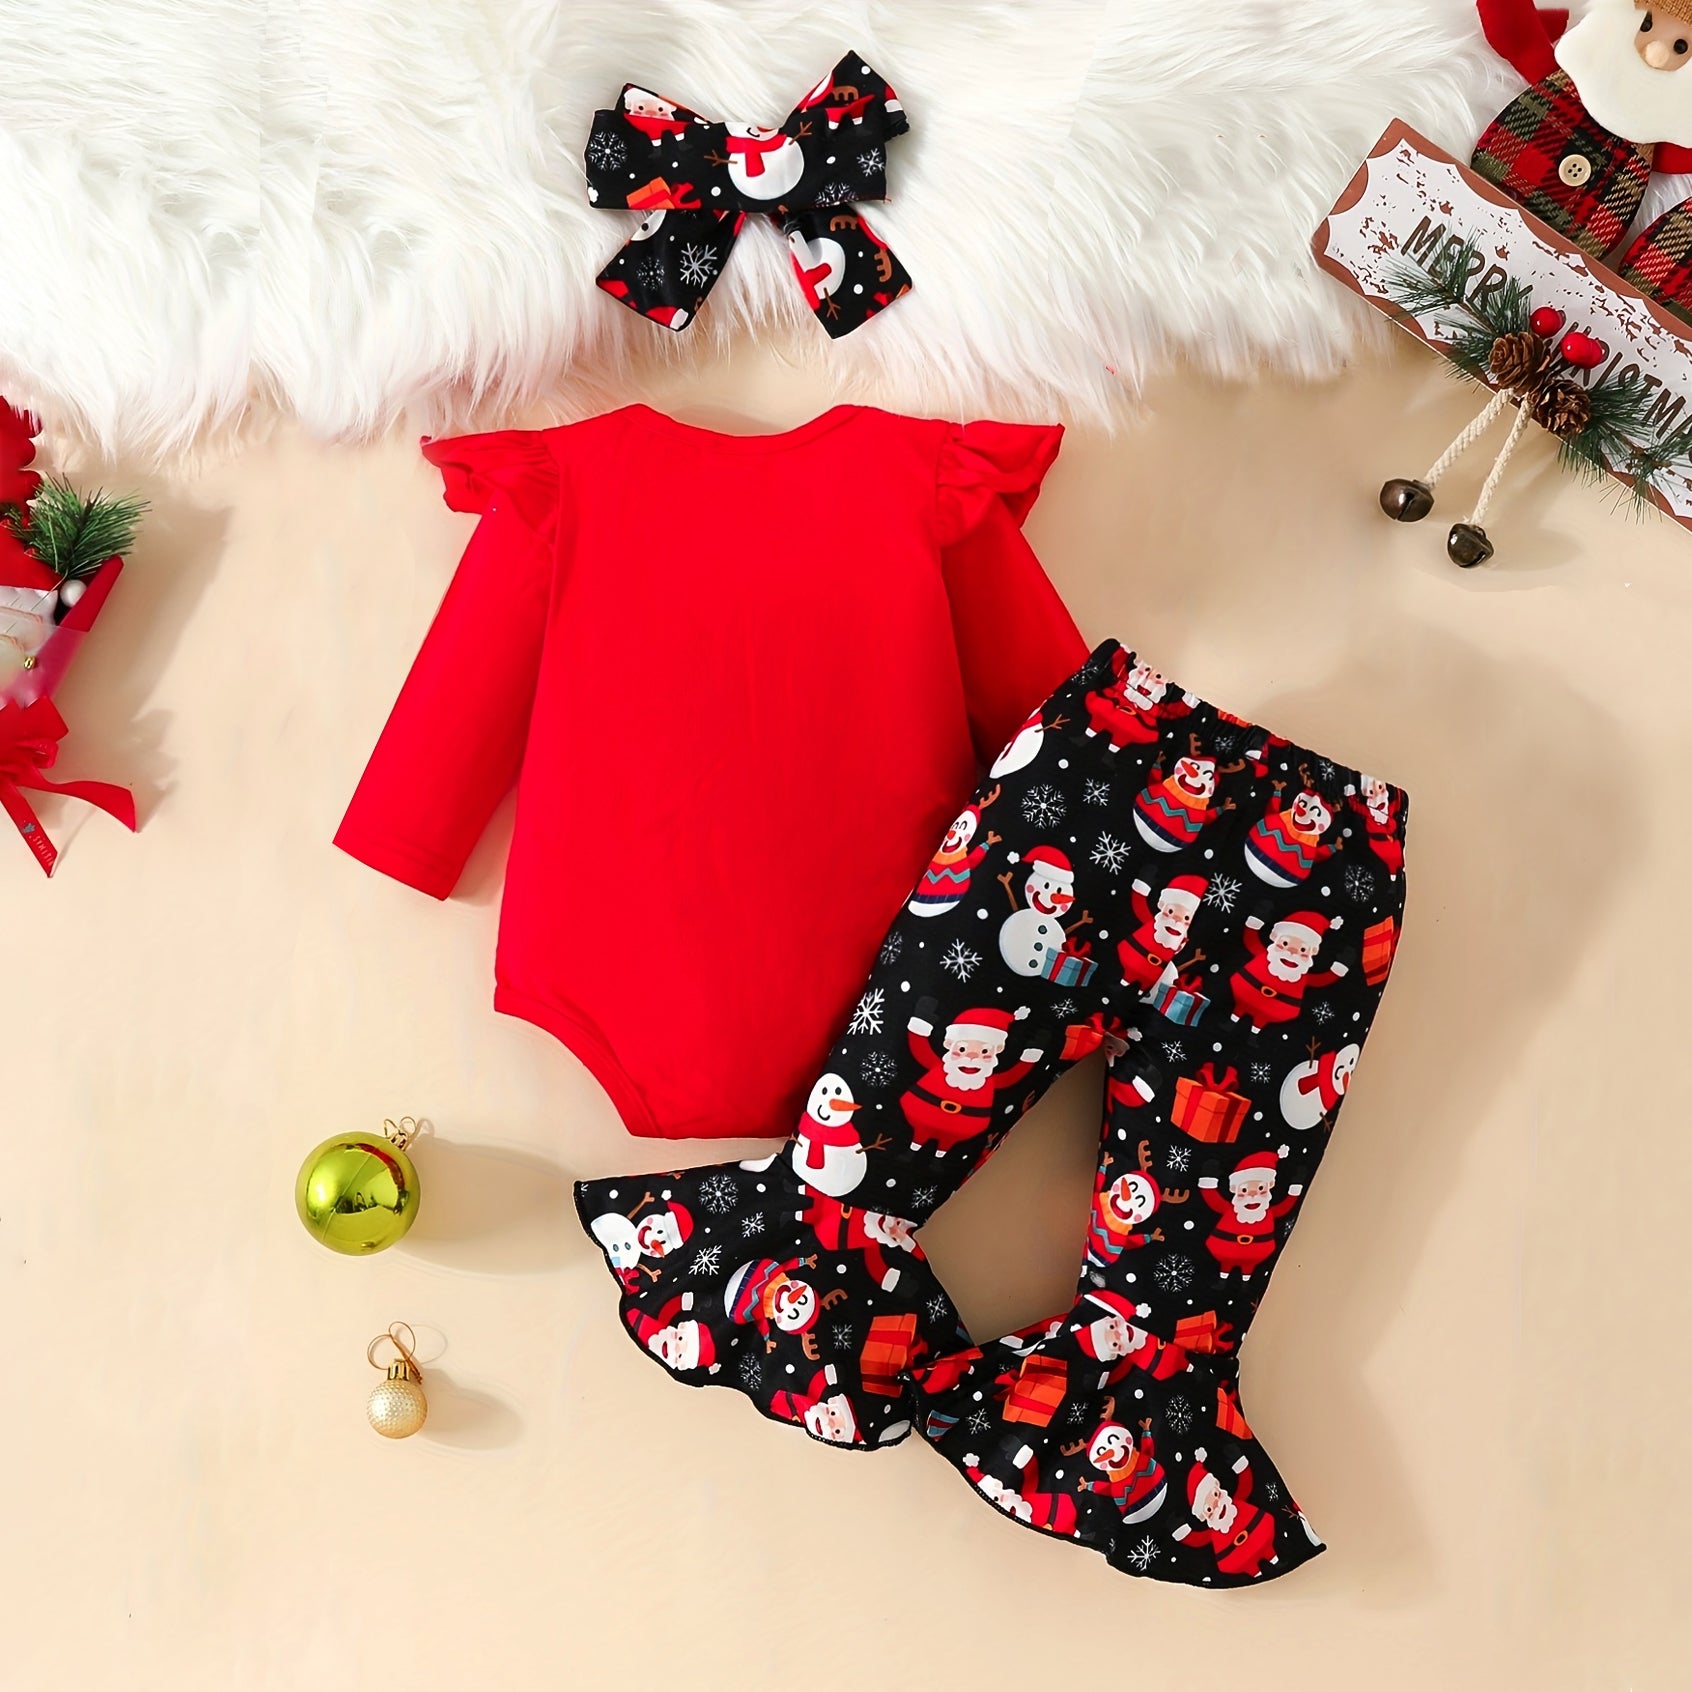 3PCS My 1st Christmas Letter and Santa Claus Printed Long Sleeve Baby Set